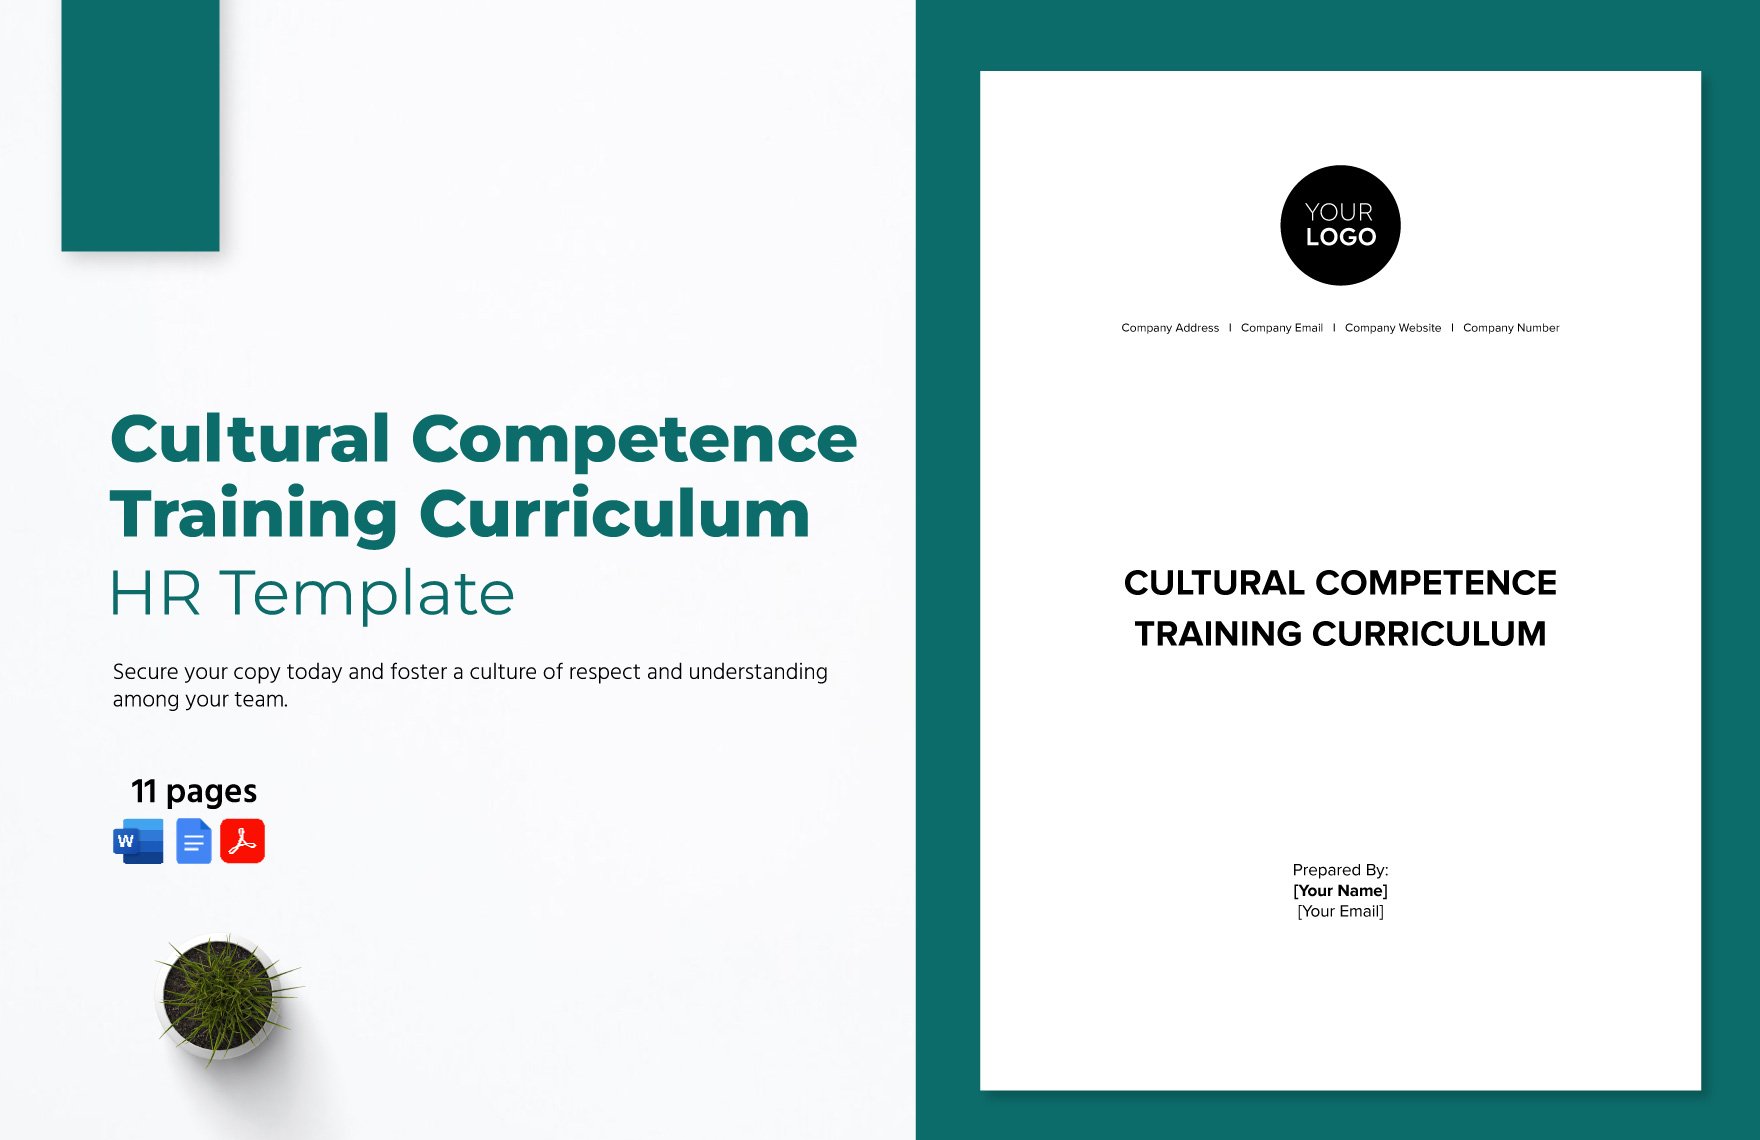 Cultural Competence Training Curriculum HR Template in Word, Google Docs, PDF